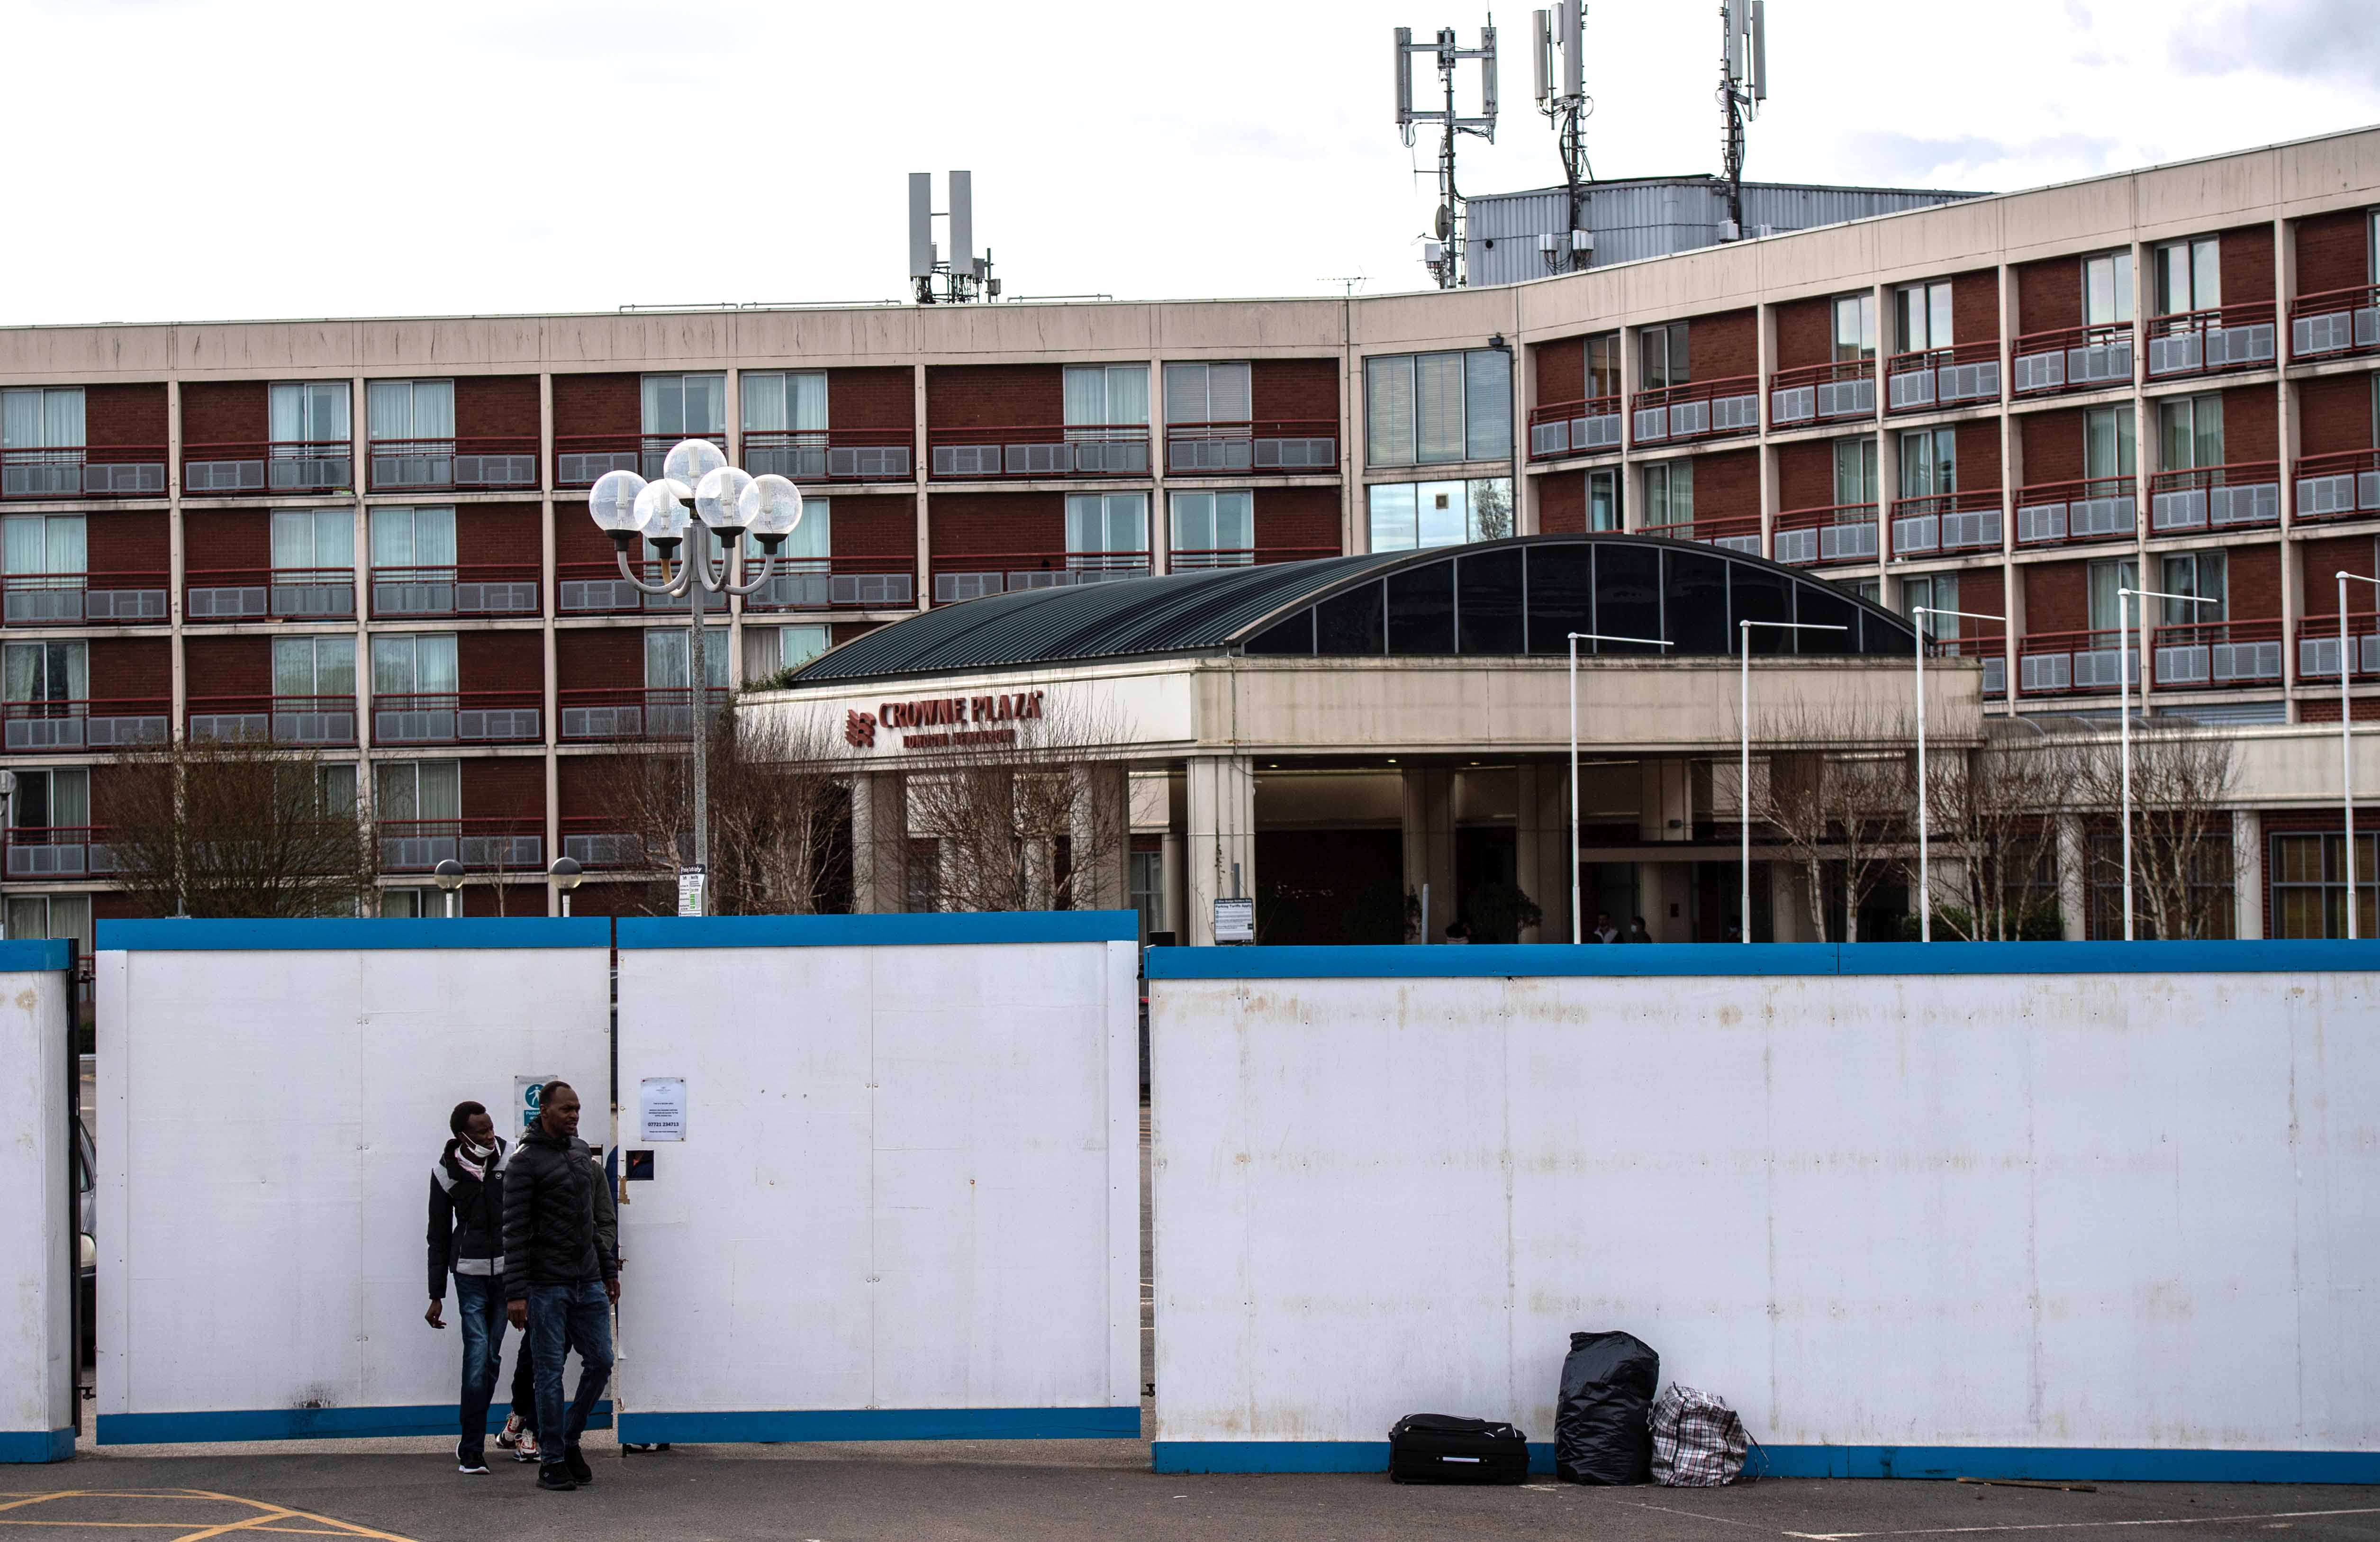 Asylum seekers at the Crowne Plaza hotel in London